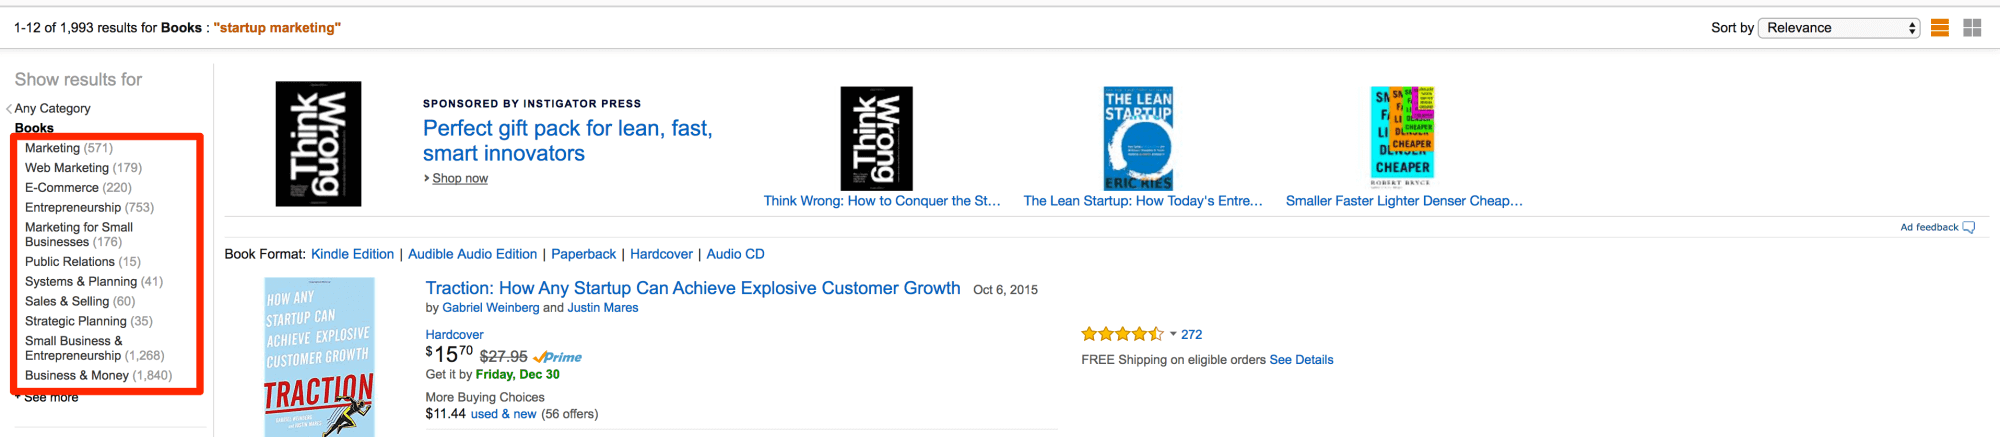 Browsing through Amazon sub categories to find content ideas